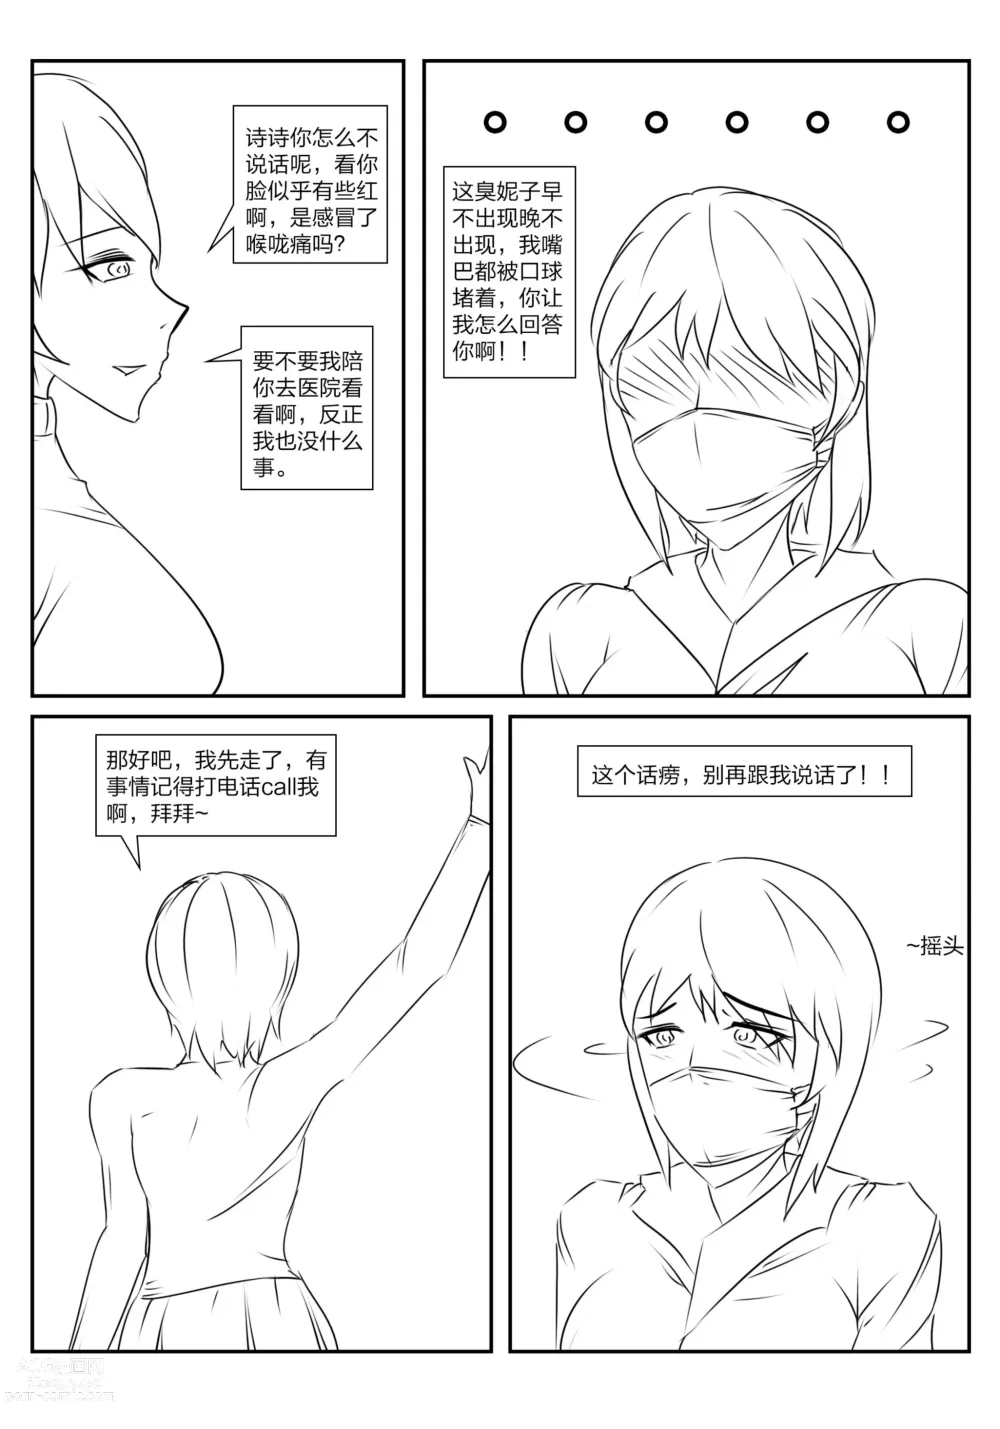 Page 39 of doujinshi The crisis in public self bondage